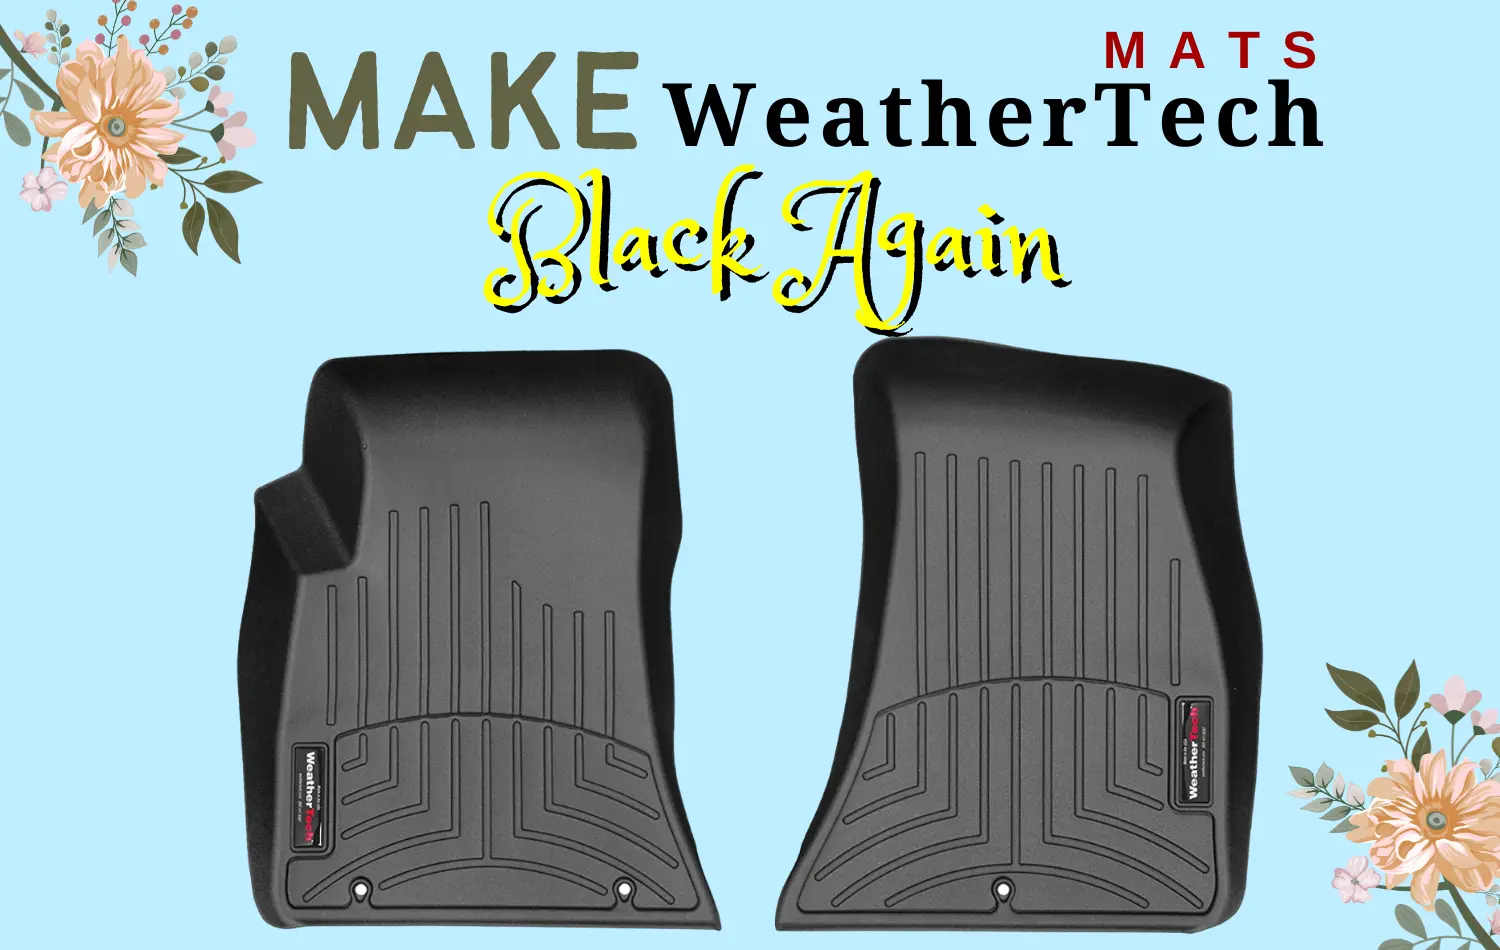 How To Get Weathertech Mats Black Again? (Step-By-Step Guide)